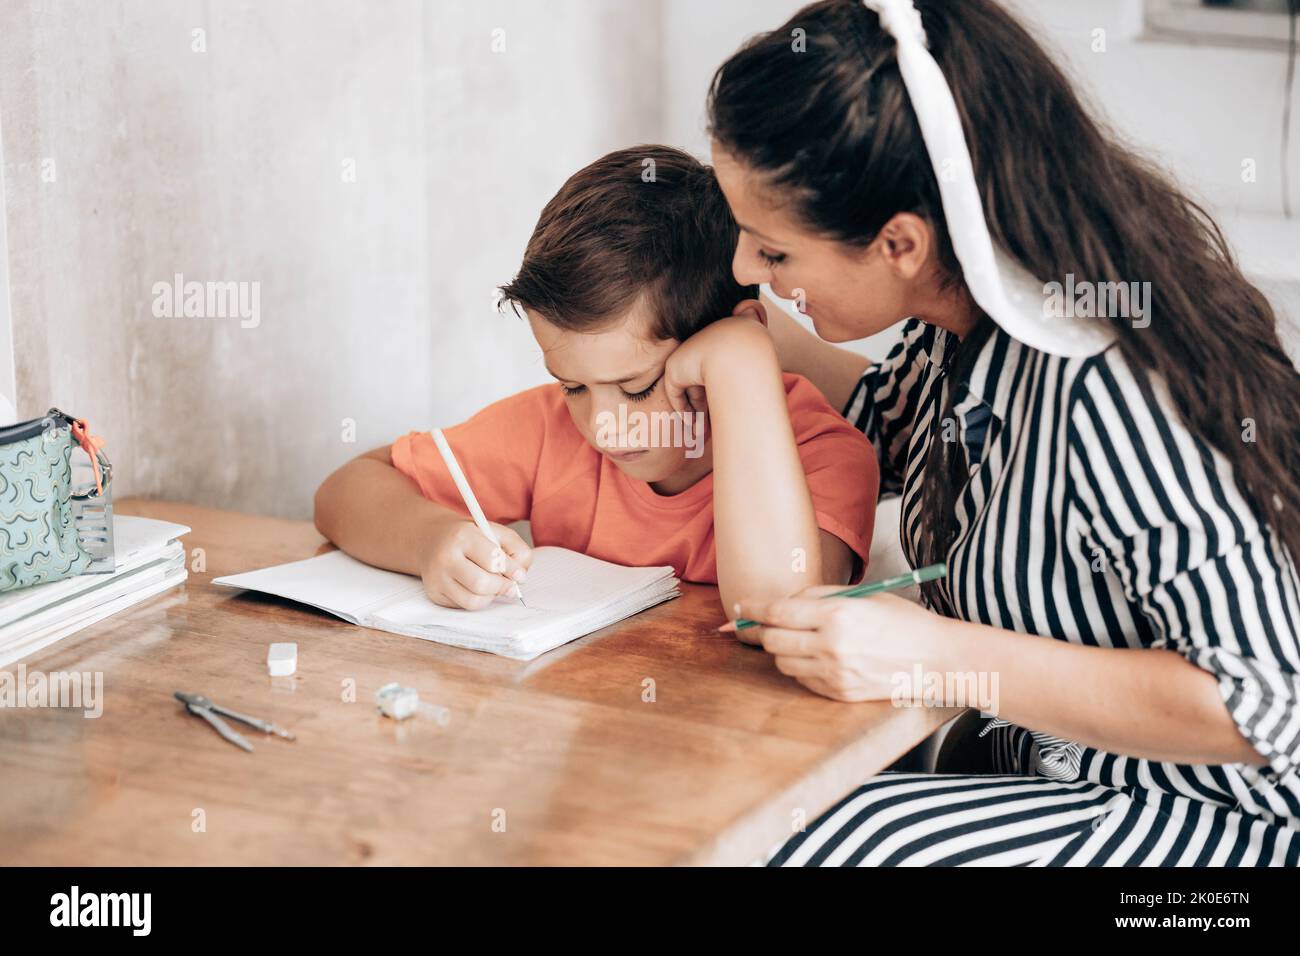 Little school boy doing homework with his mom helping him with assignments Stock Photo